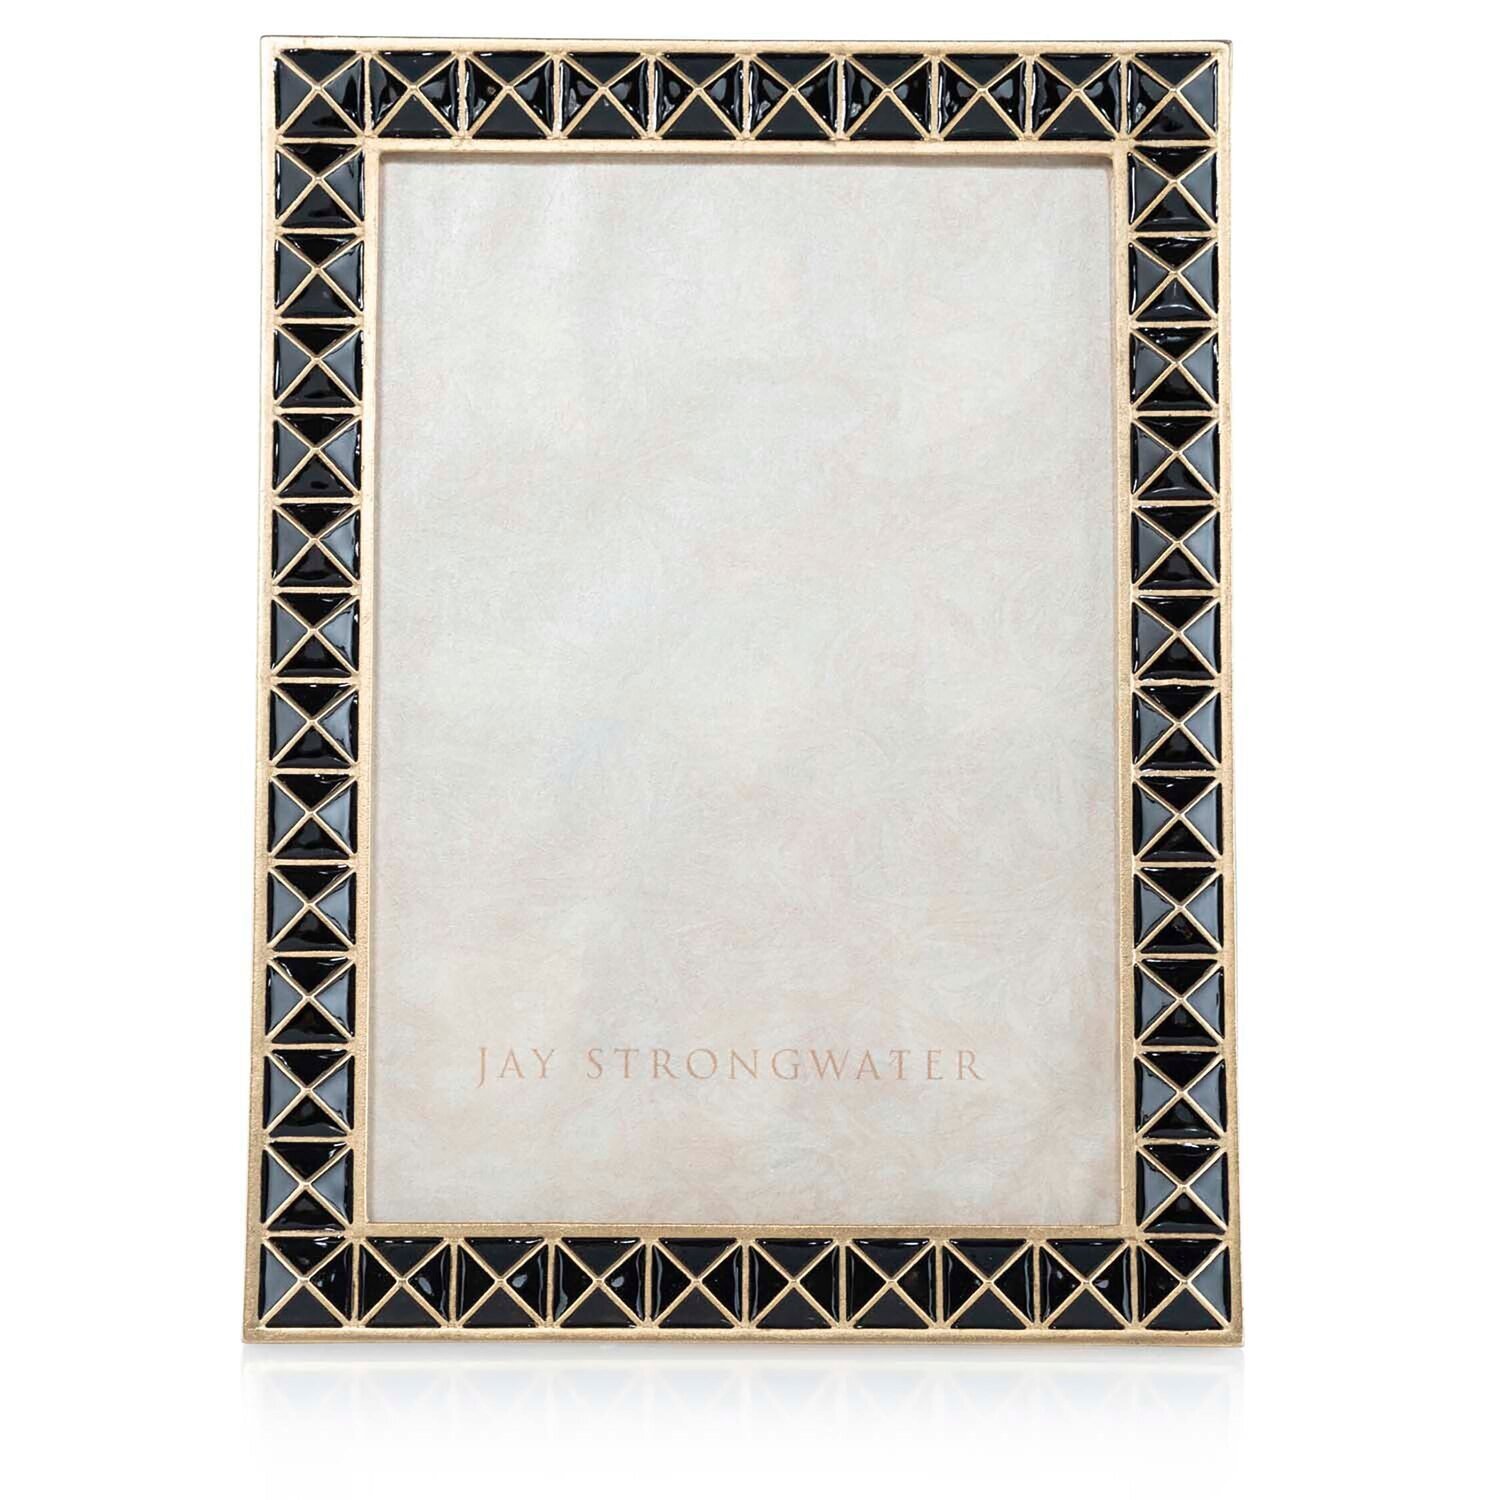 Jay Strongwater Pyramid 3 x 4 Inch Picture Frame SPF5876-220